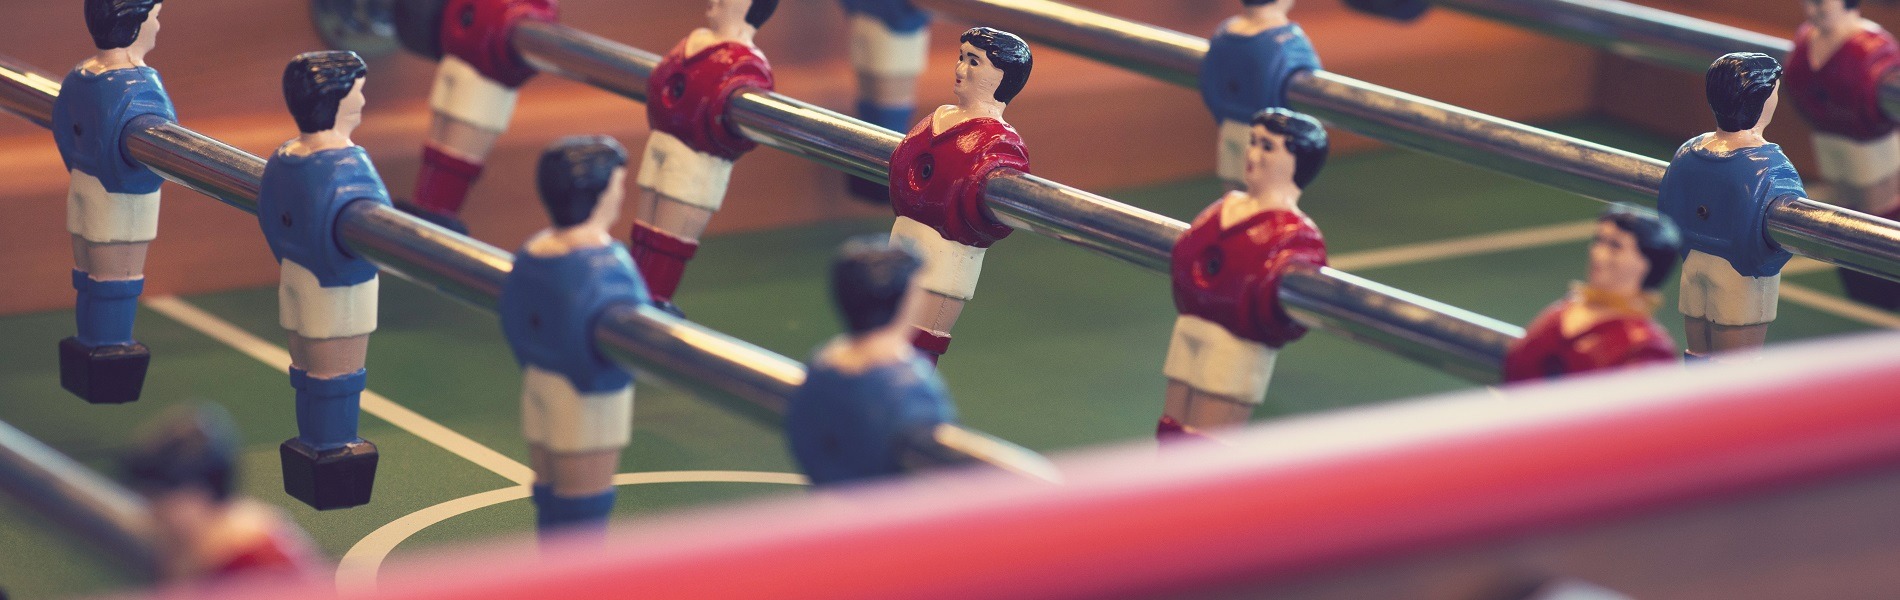 Stock image Foosball table close up